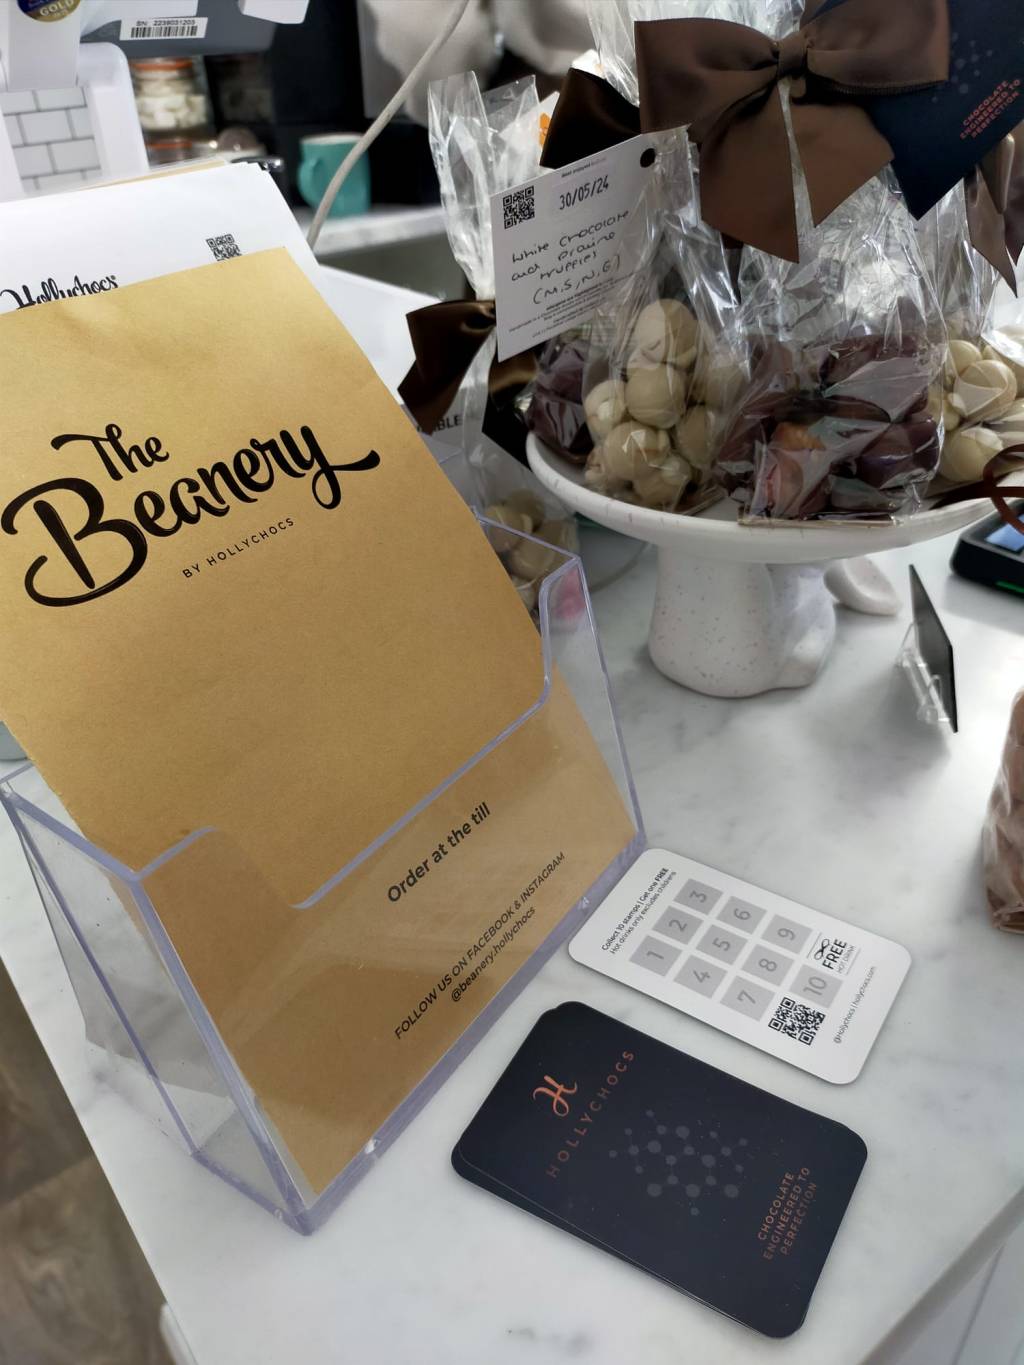 Review: The Beanery Cafe at Hollychocs, Devizes